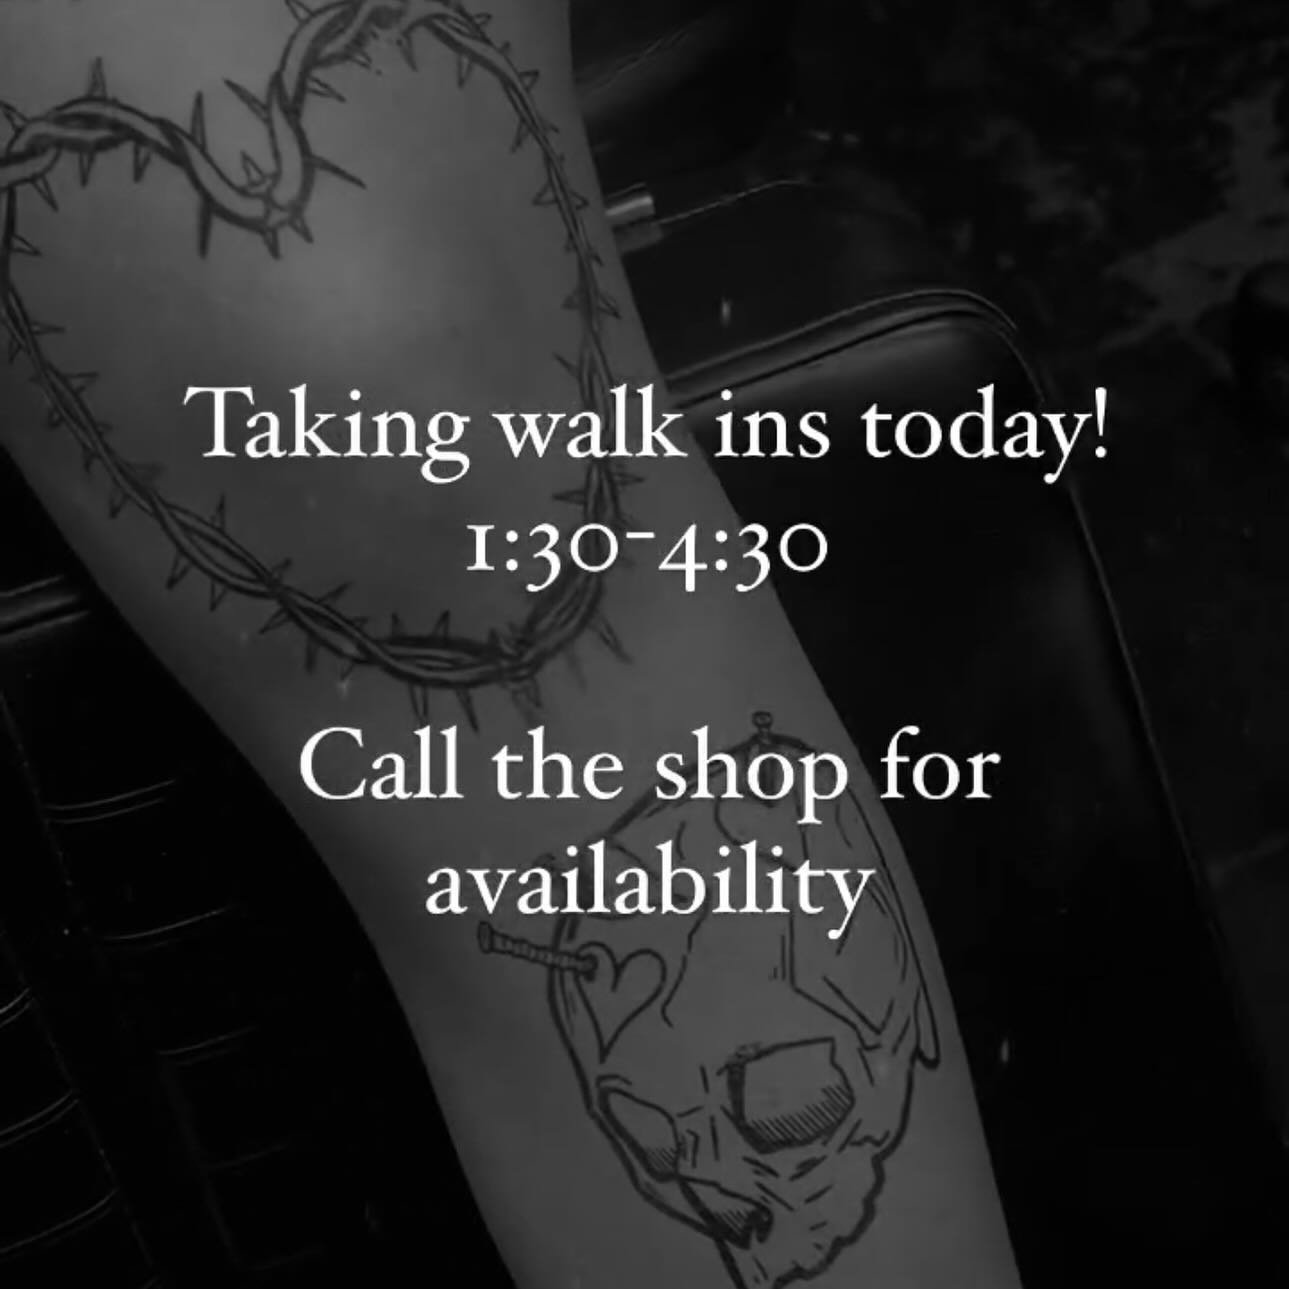 @morgandianntattoo is taking walk ins starting at 1:30 today! Swing by and snag something rad!